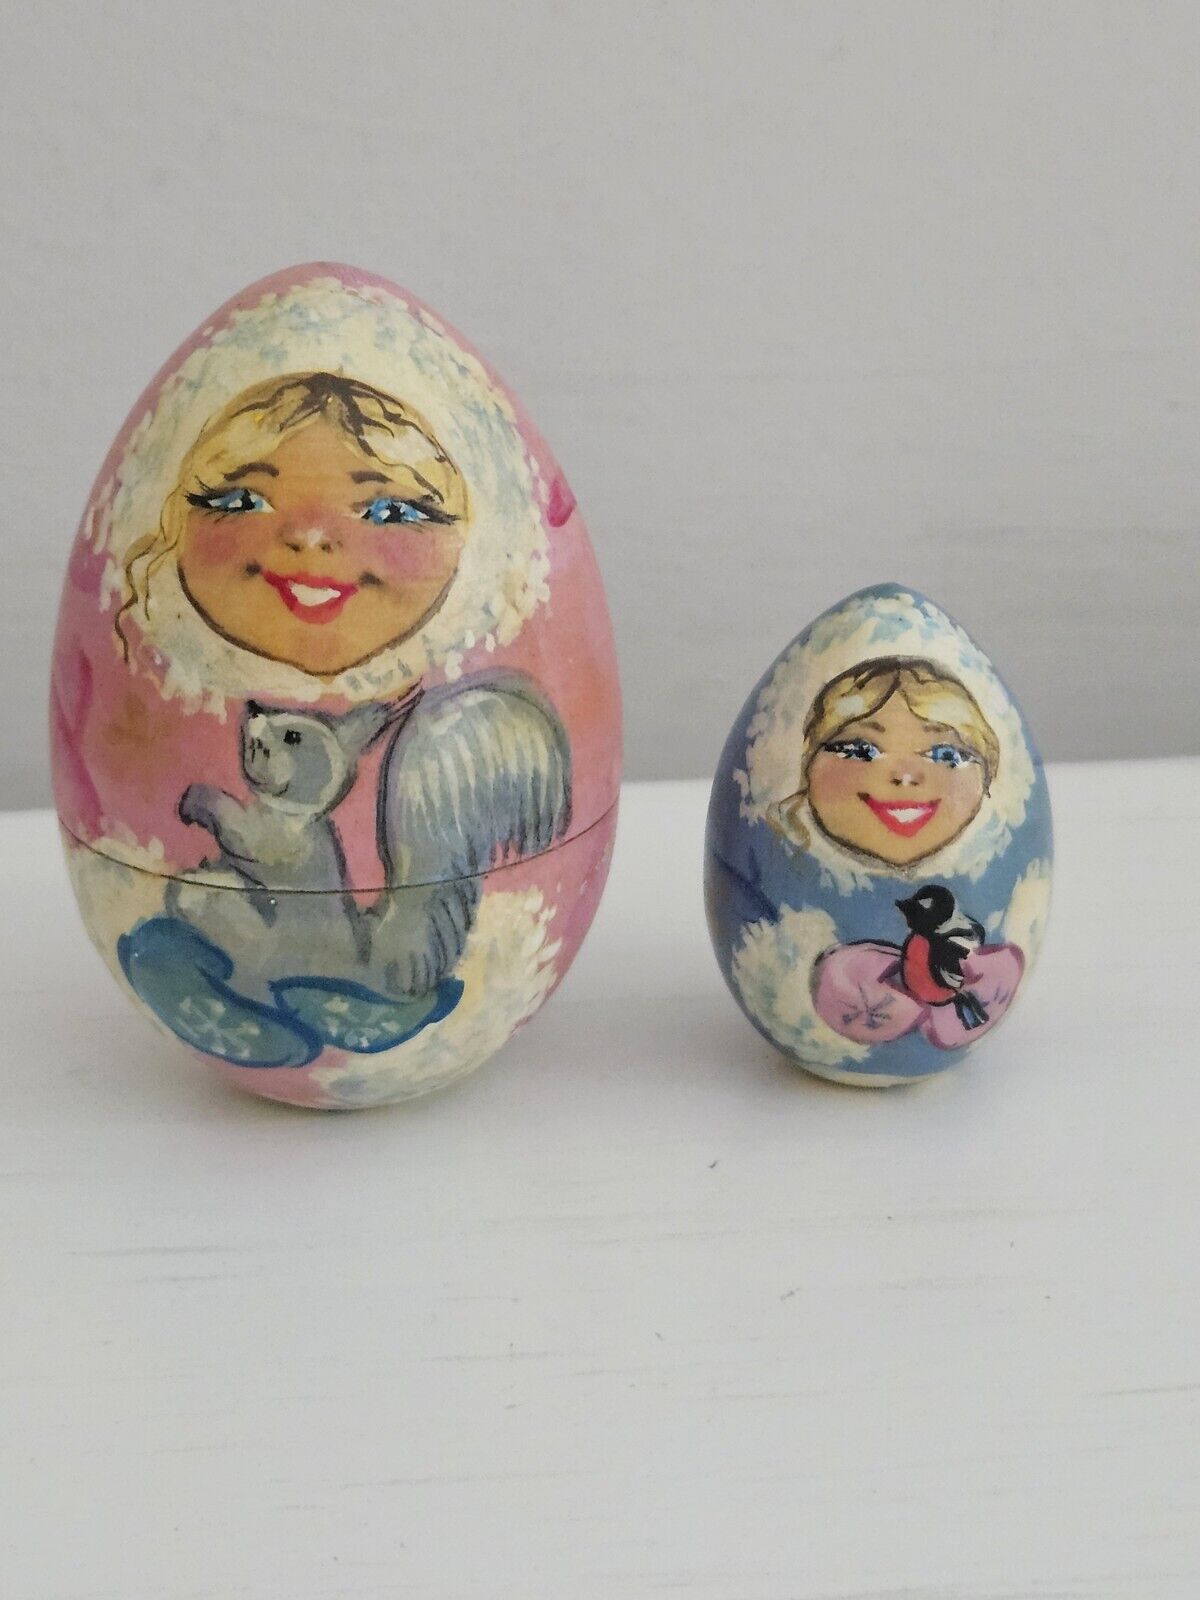 Vintage Wooden Hand-Painted Egg Nesting Doll Girl Squirrel Bird Set Of 2